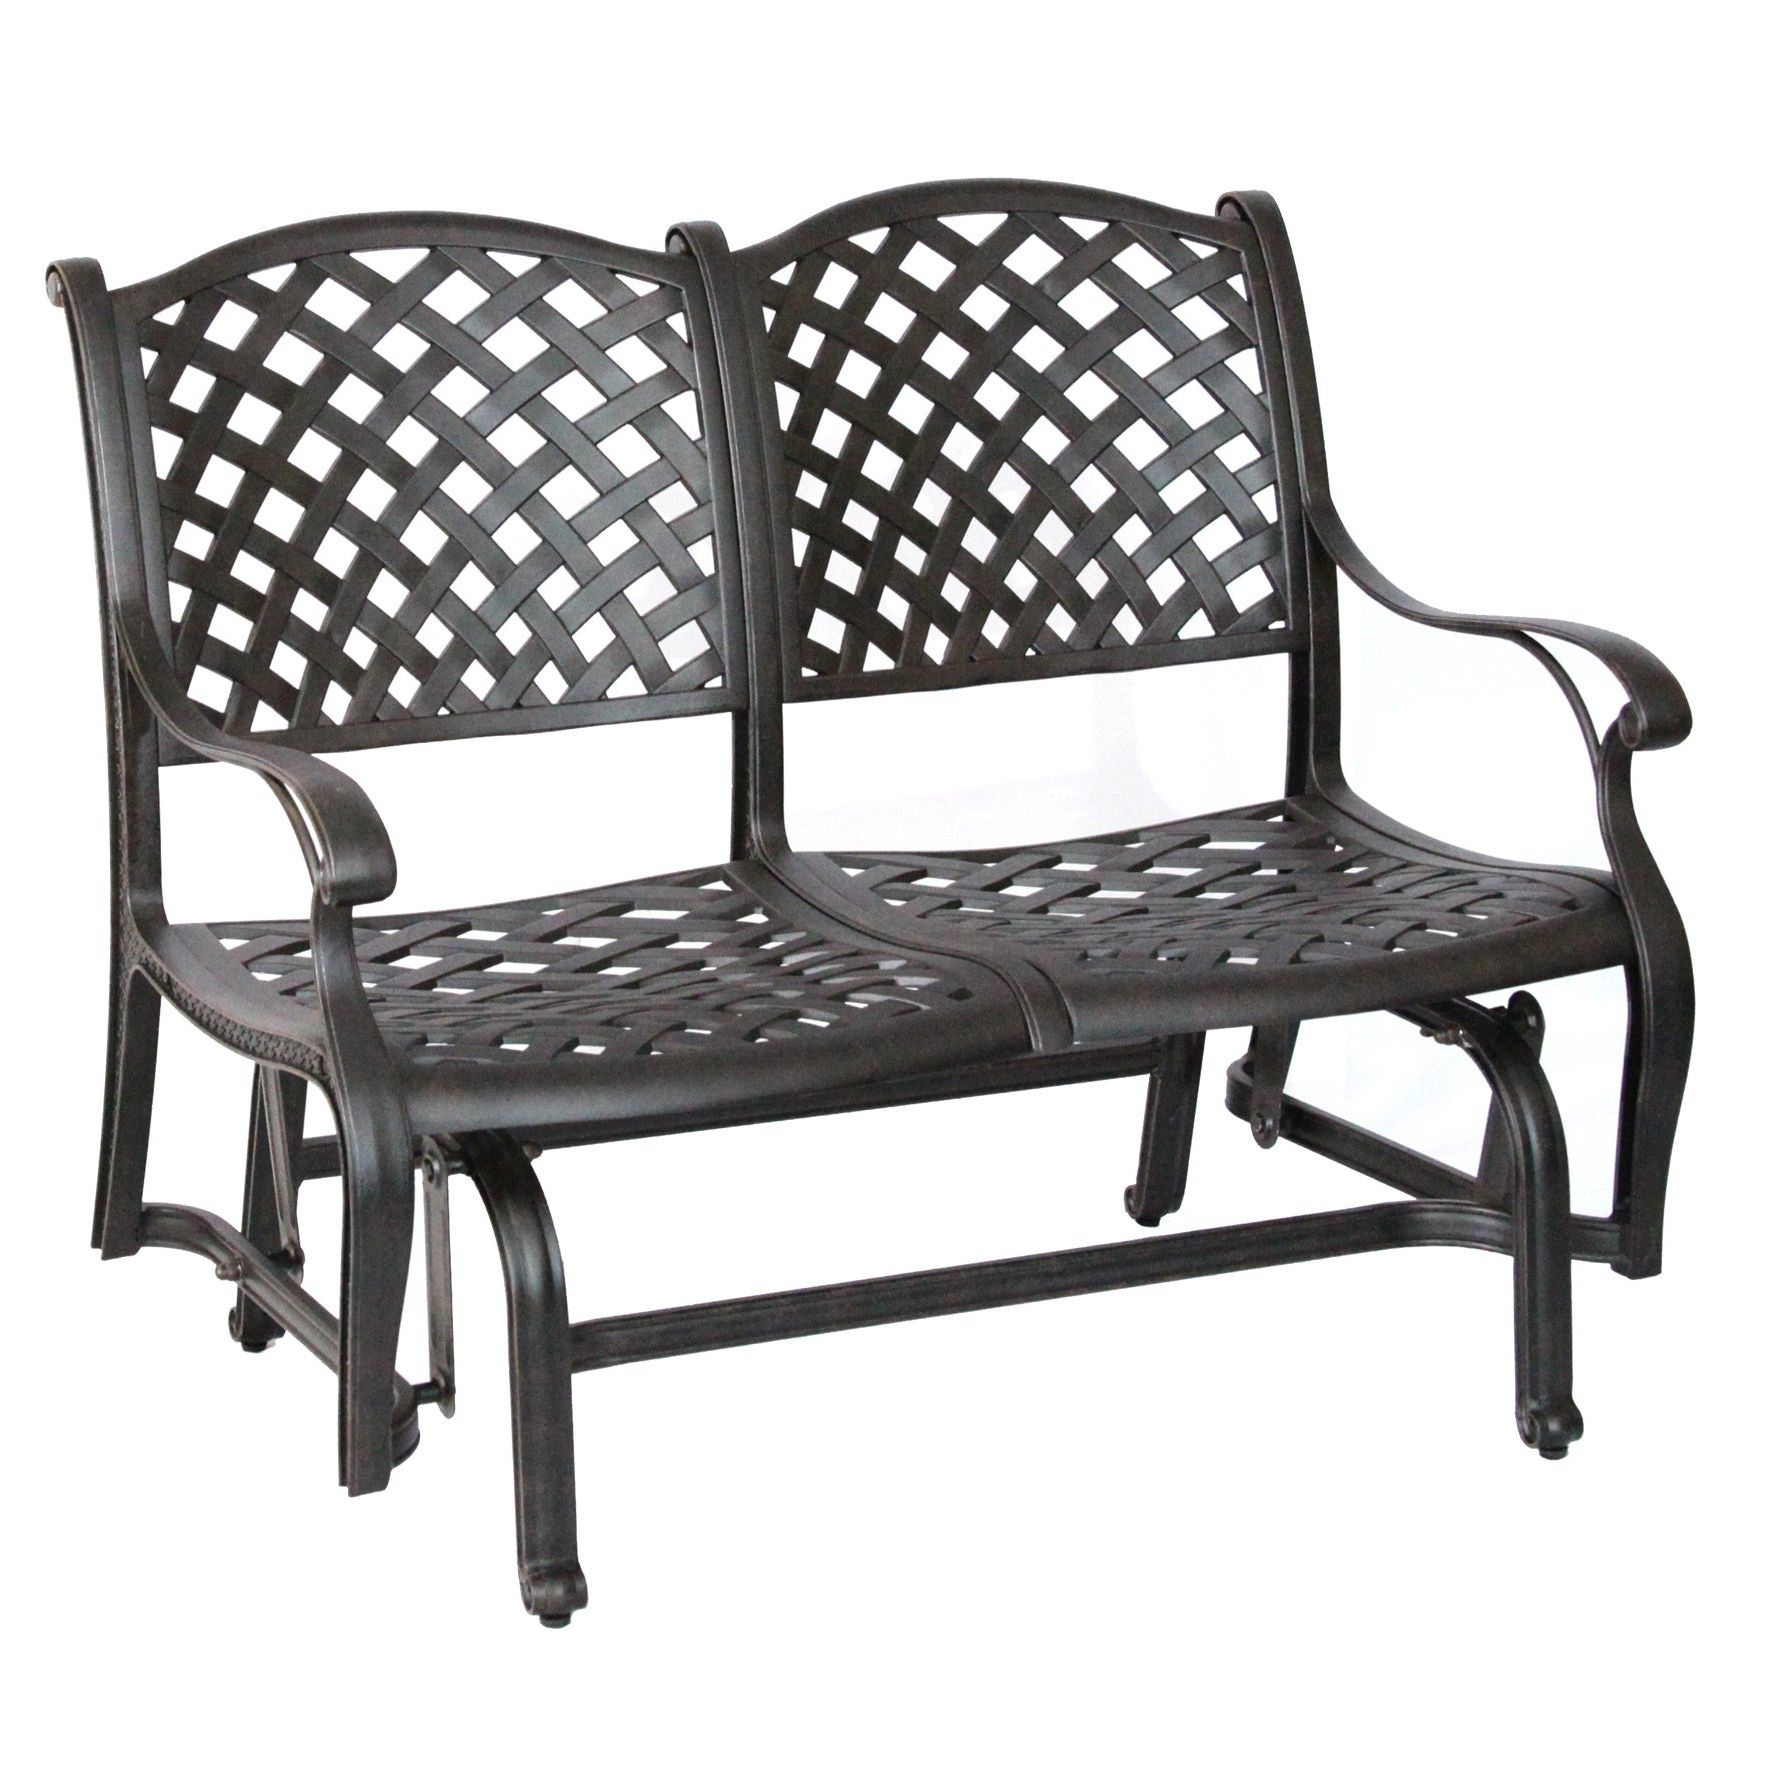 Darlee Nassau Cast Aluminum Glider Bench With Seat Cushion Throughout Trendy Metal Powder Coat Double Seat Glider Benches (View 25 of 30)